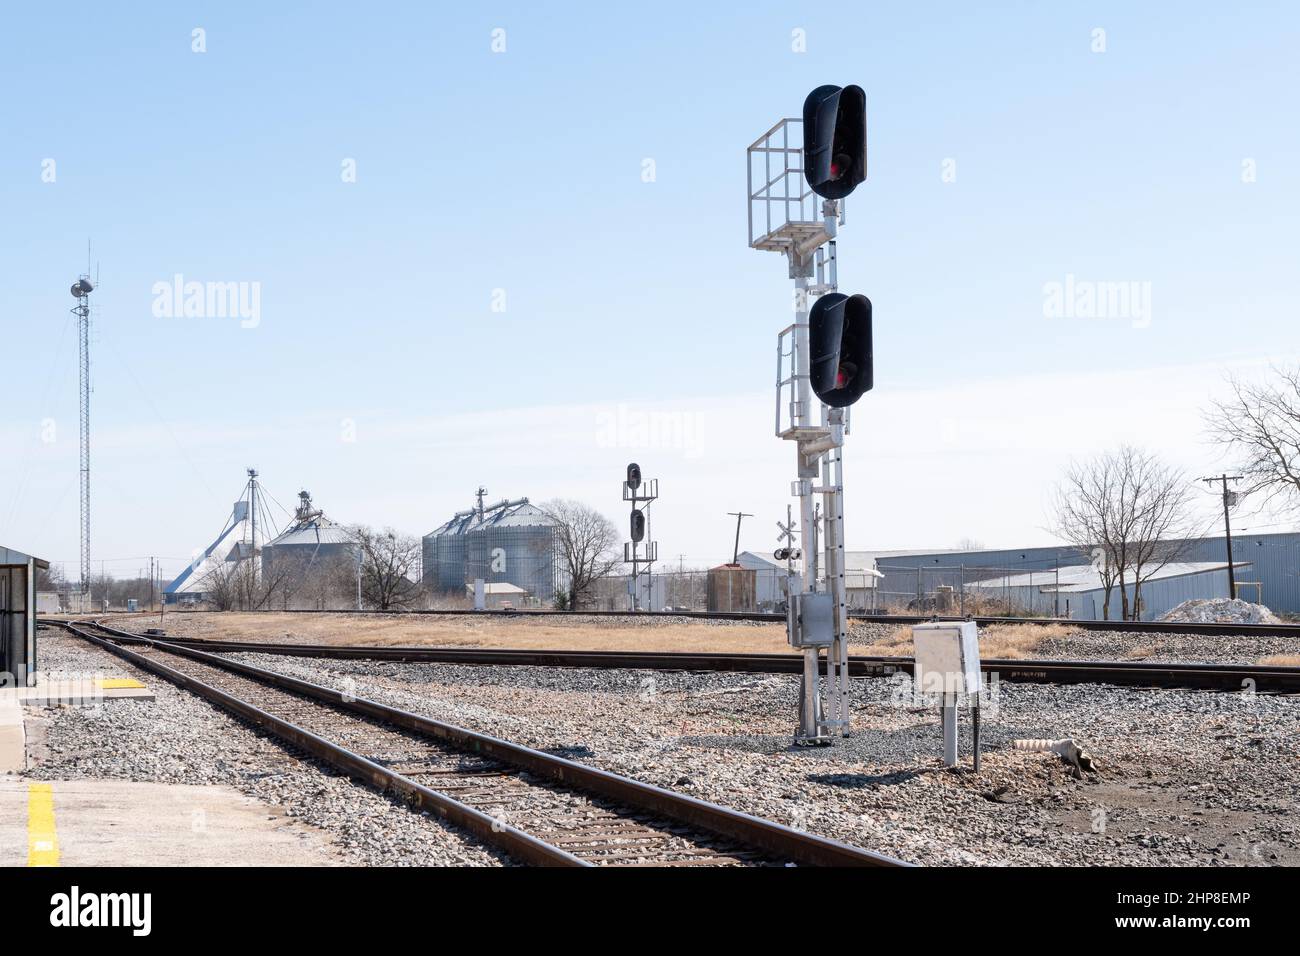 Main line railroad traffic signal for control of train speed and movement Stock Photo